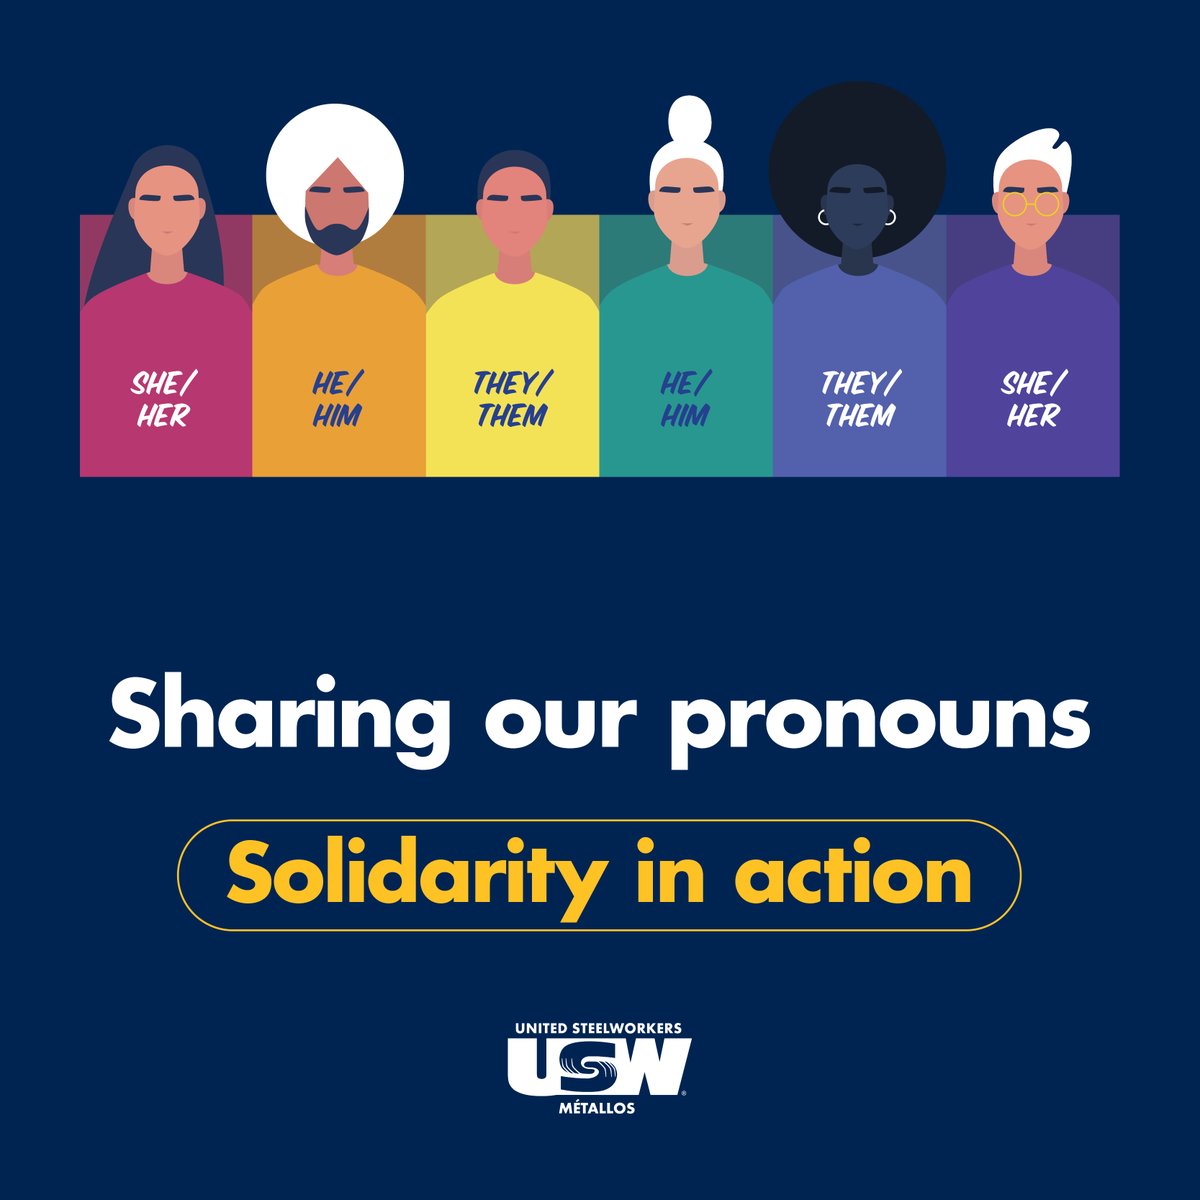 At our events and meetings, we encourage everyone who is comfortable to share their #pronouns because it lets others know that we are not going to assume someone’s gender. Learn more about pronouns: usw.ca/sharing-our-pr…